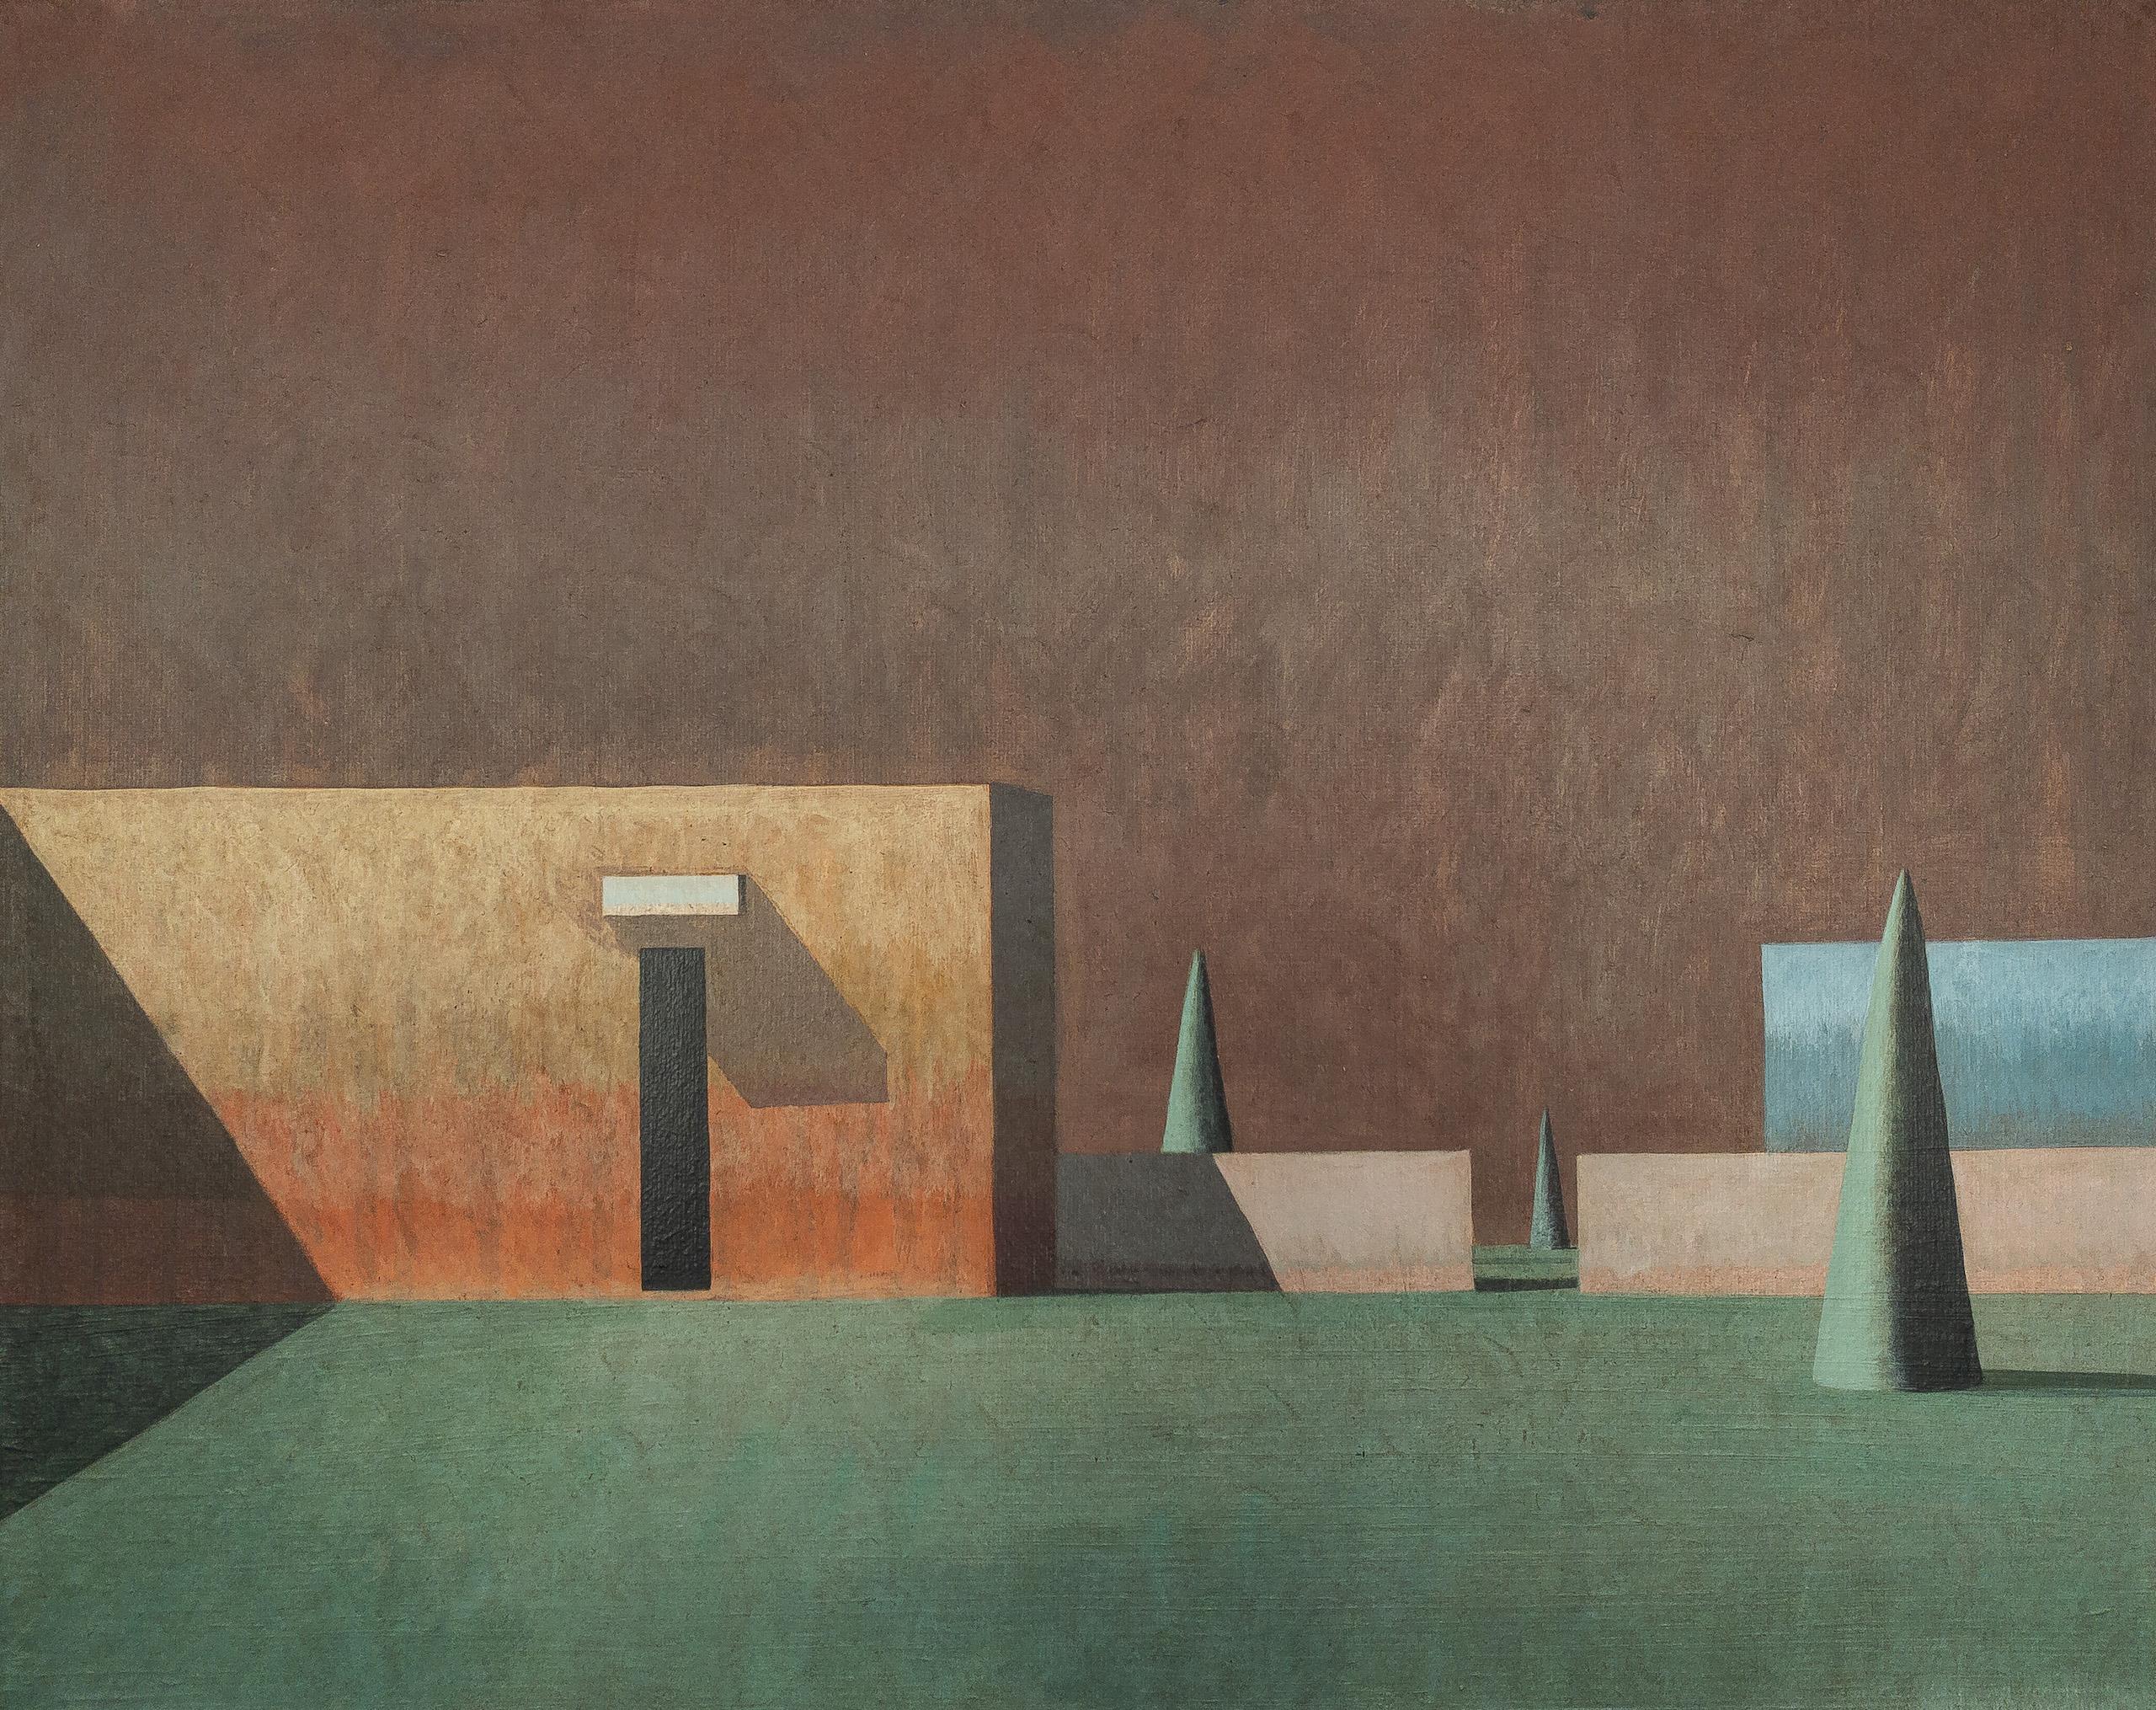 PAS by Spanish contemporary artist Ramon Enrich. 
Acrylic on canvas, 40 cm x 50 cm.

In these paintings, the artist establishes a conversation between architecture and landscape in a figurative work boasting geometric shapes and an enigmatic